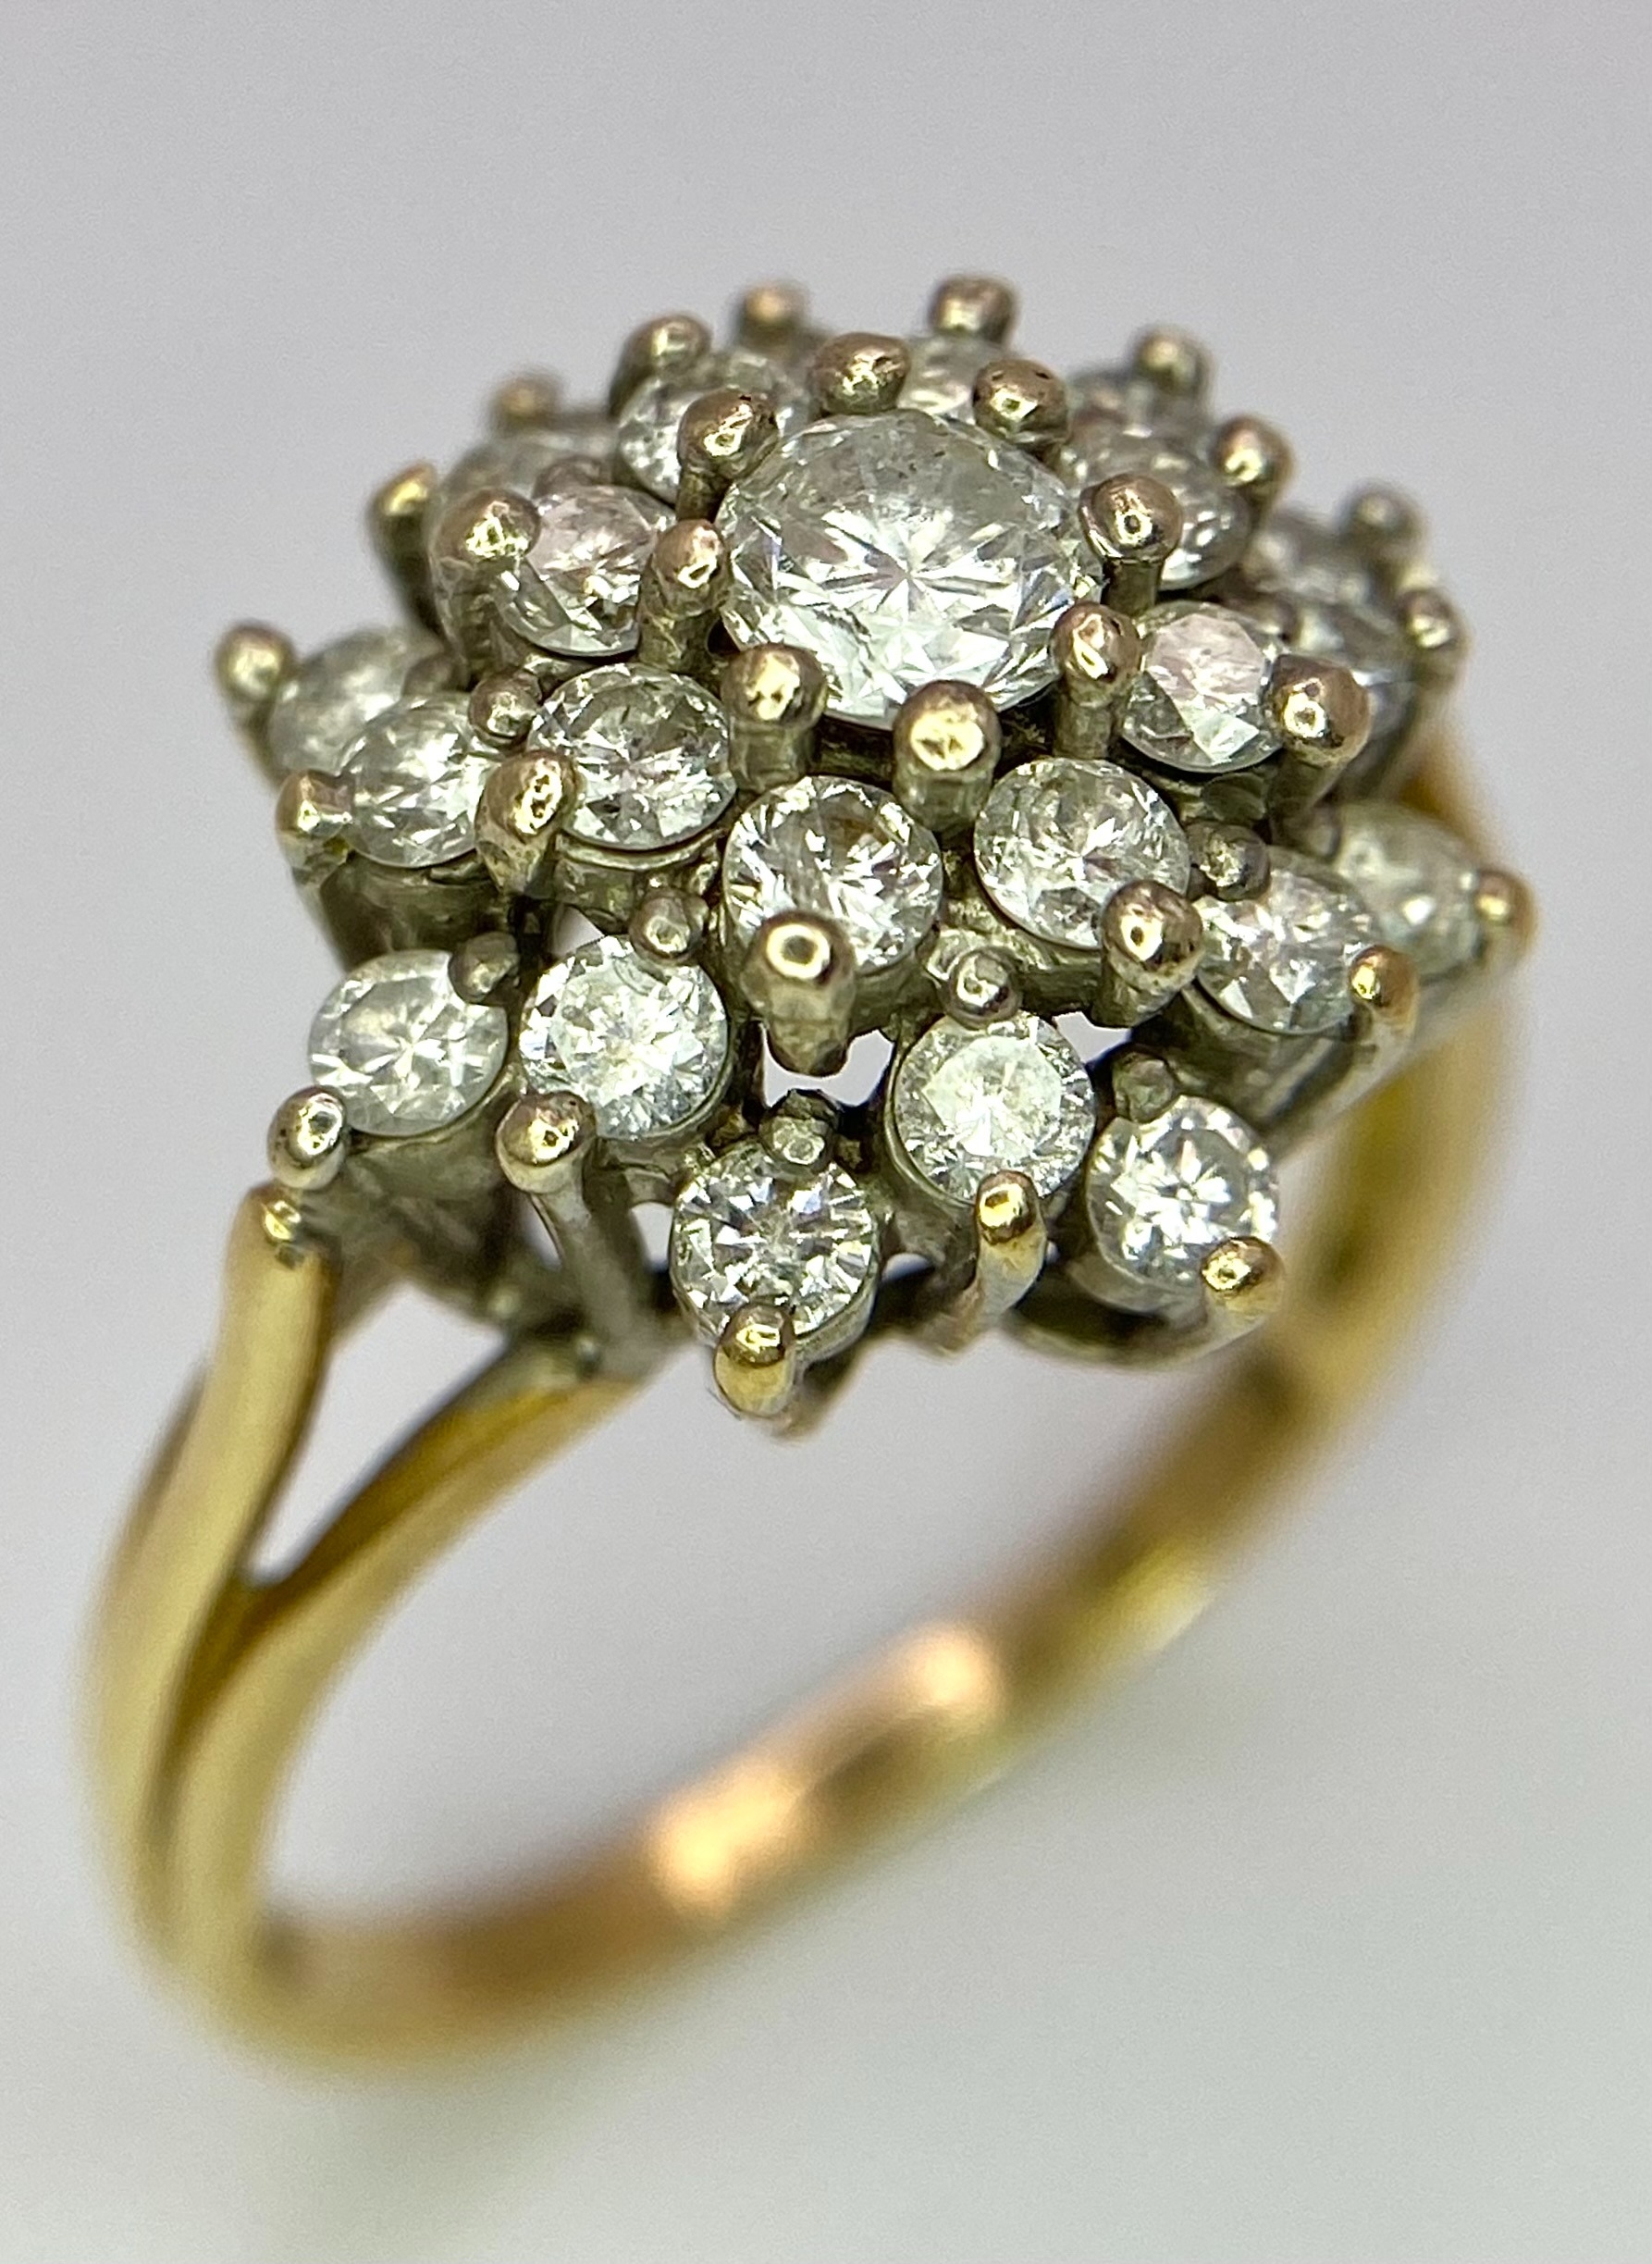 AN 18K YELLOW GOLD DIAMOND CLUSTER RING - 1CTW. 4.2G. SIZE L 1/2. - Image 2 of 7